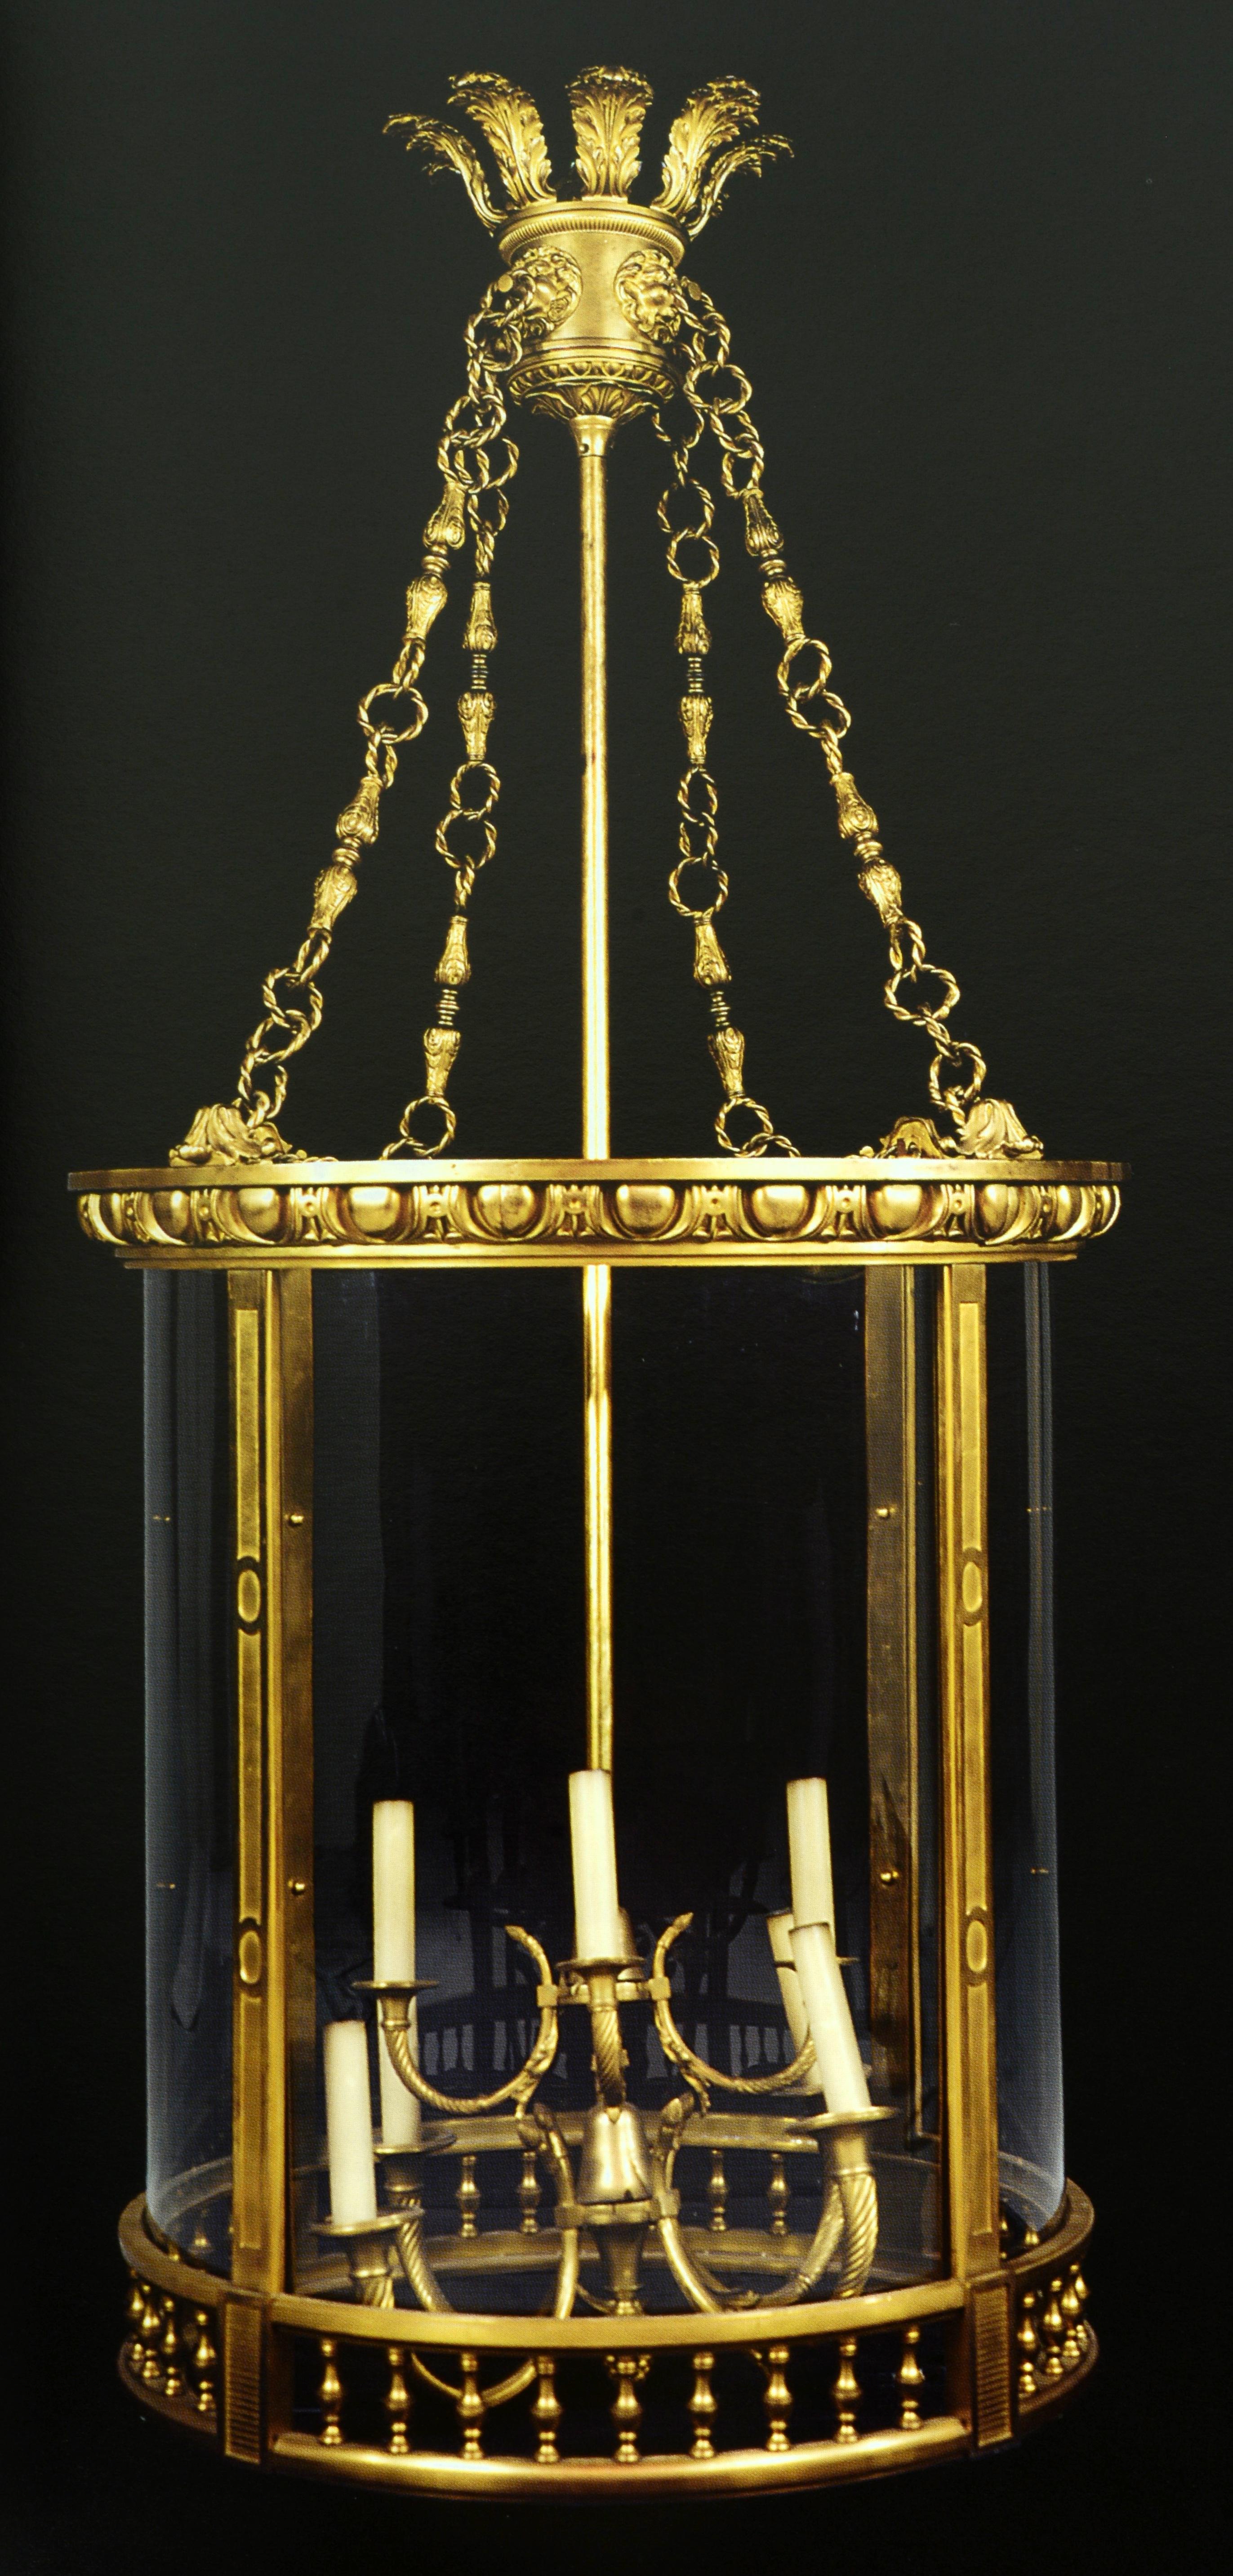 Contemporary Boulle to Jansen, an Important European Private Collection, June 2003 For Sale